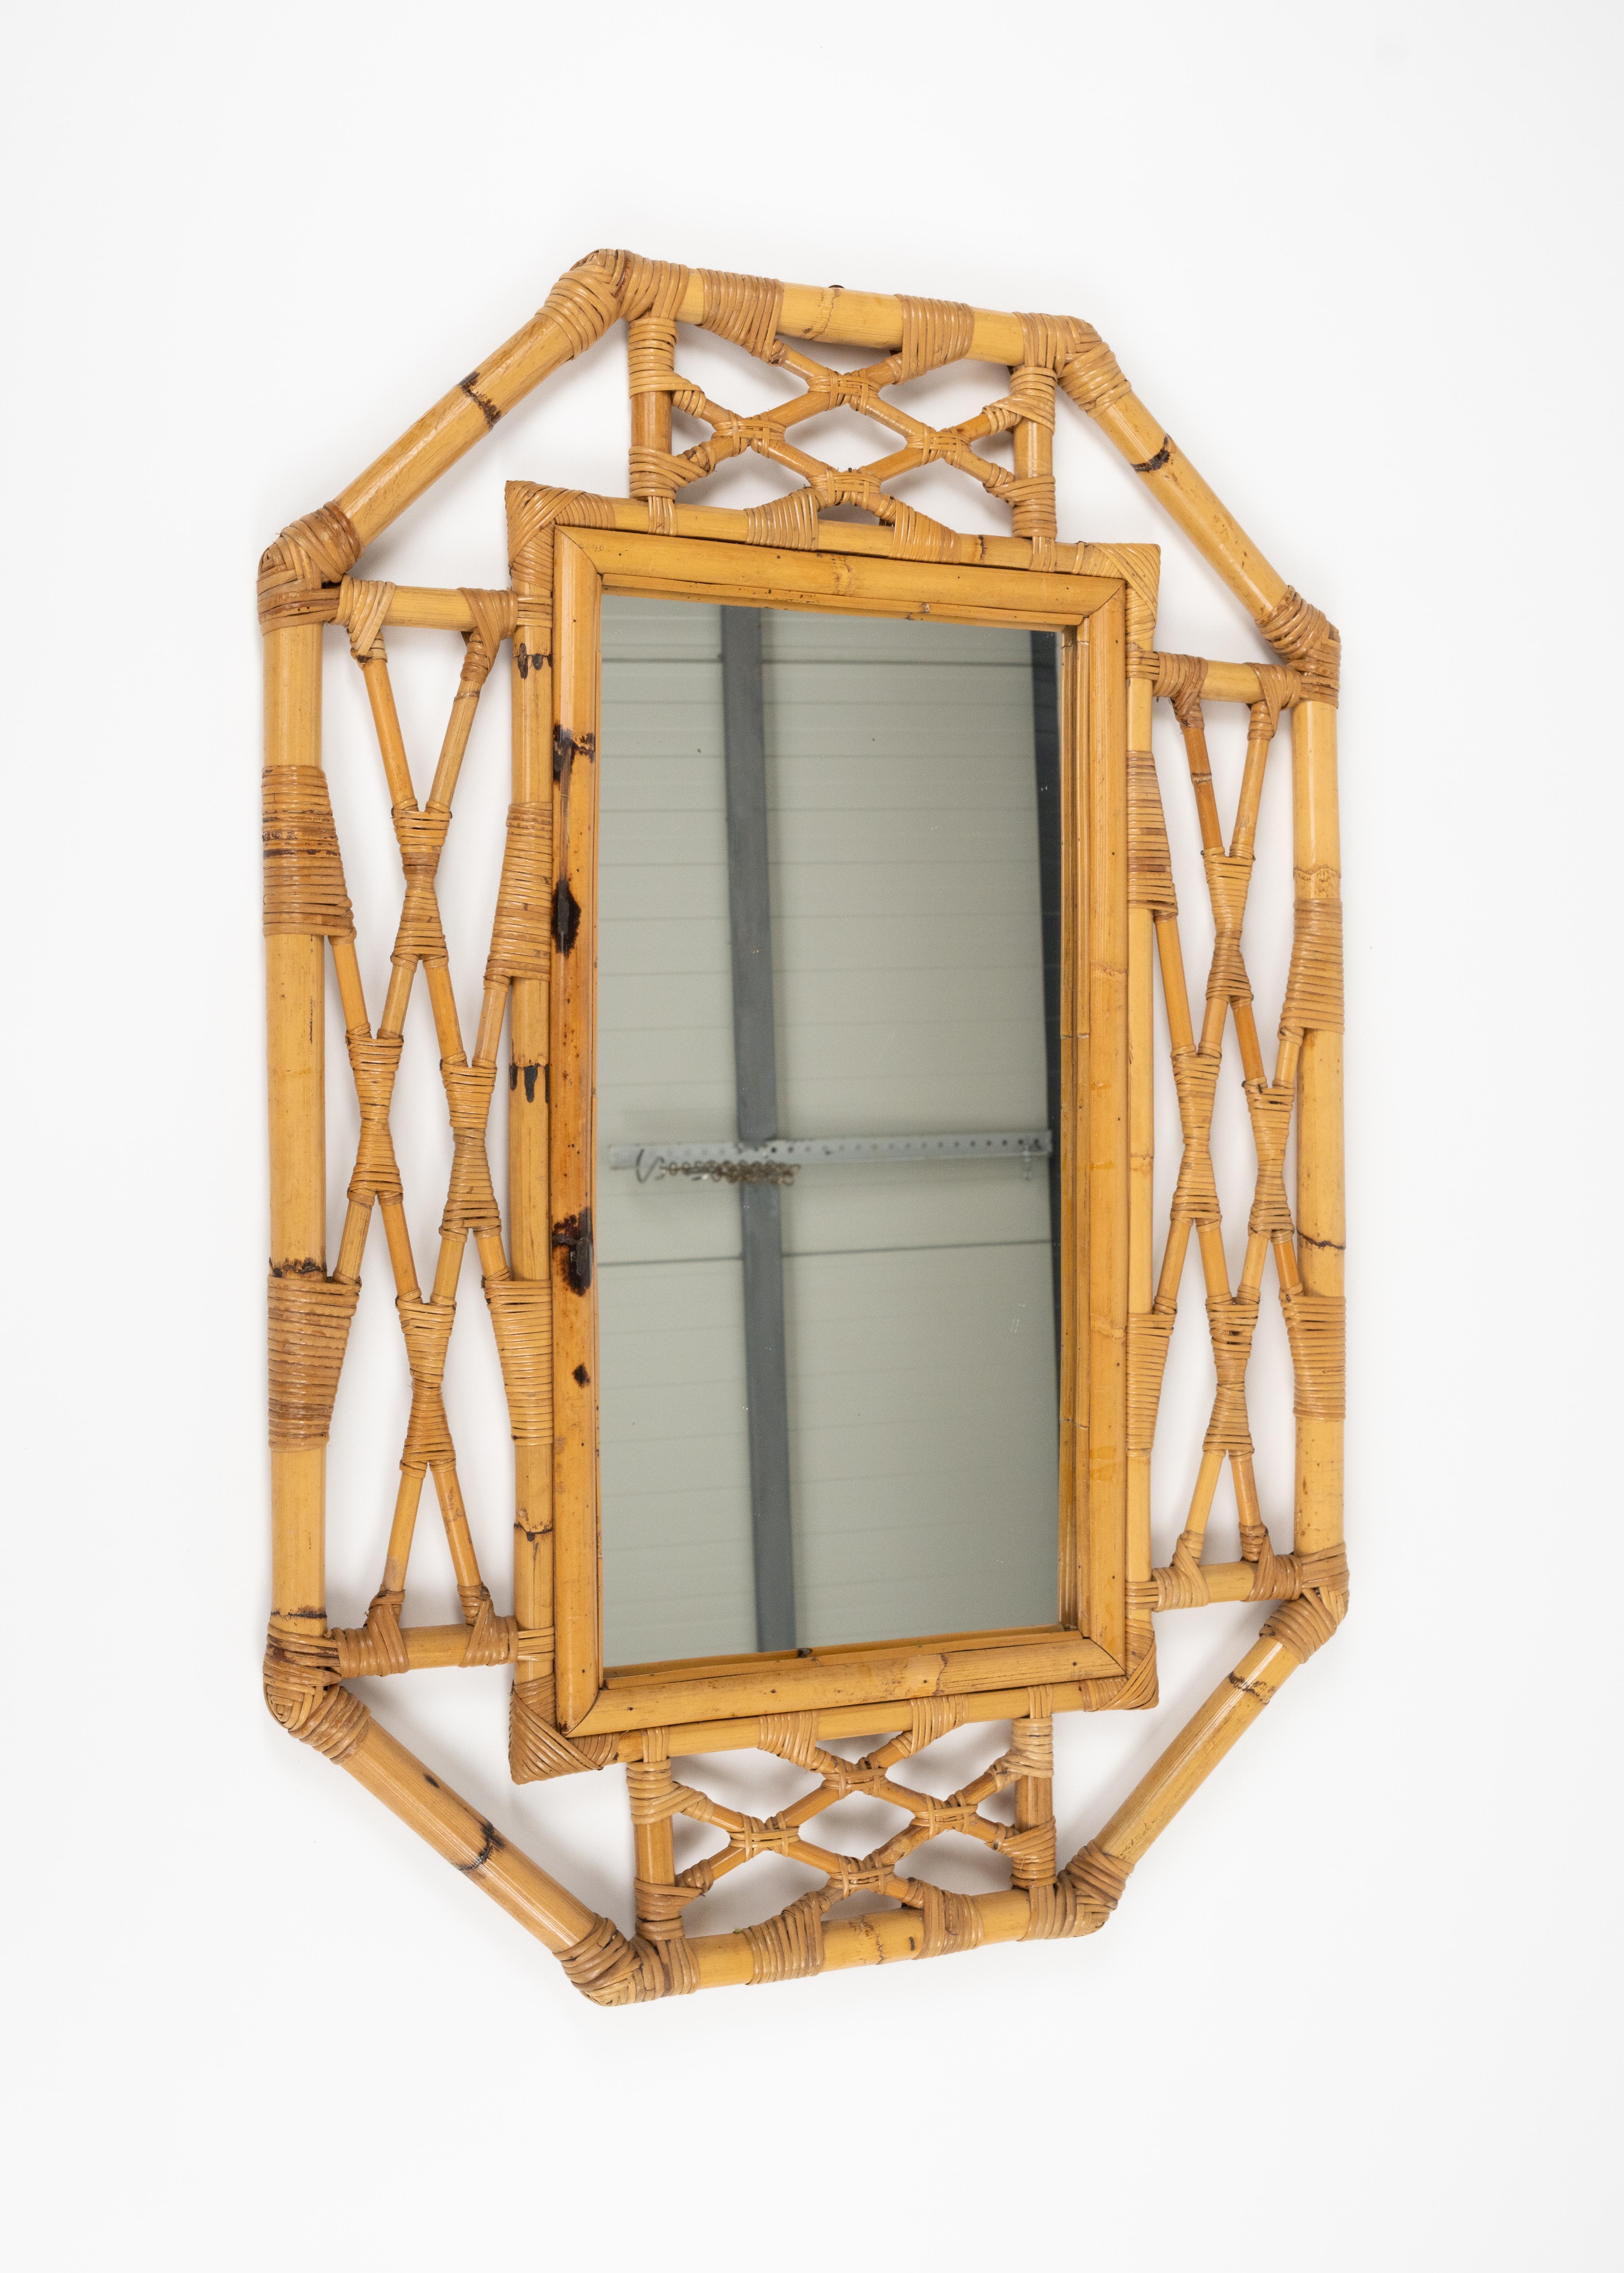 Italian Midcentury Bamboo and Rattan Wall Mirror Vivai Del Sud Style, Italy 1970s For Sale